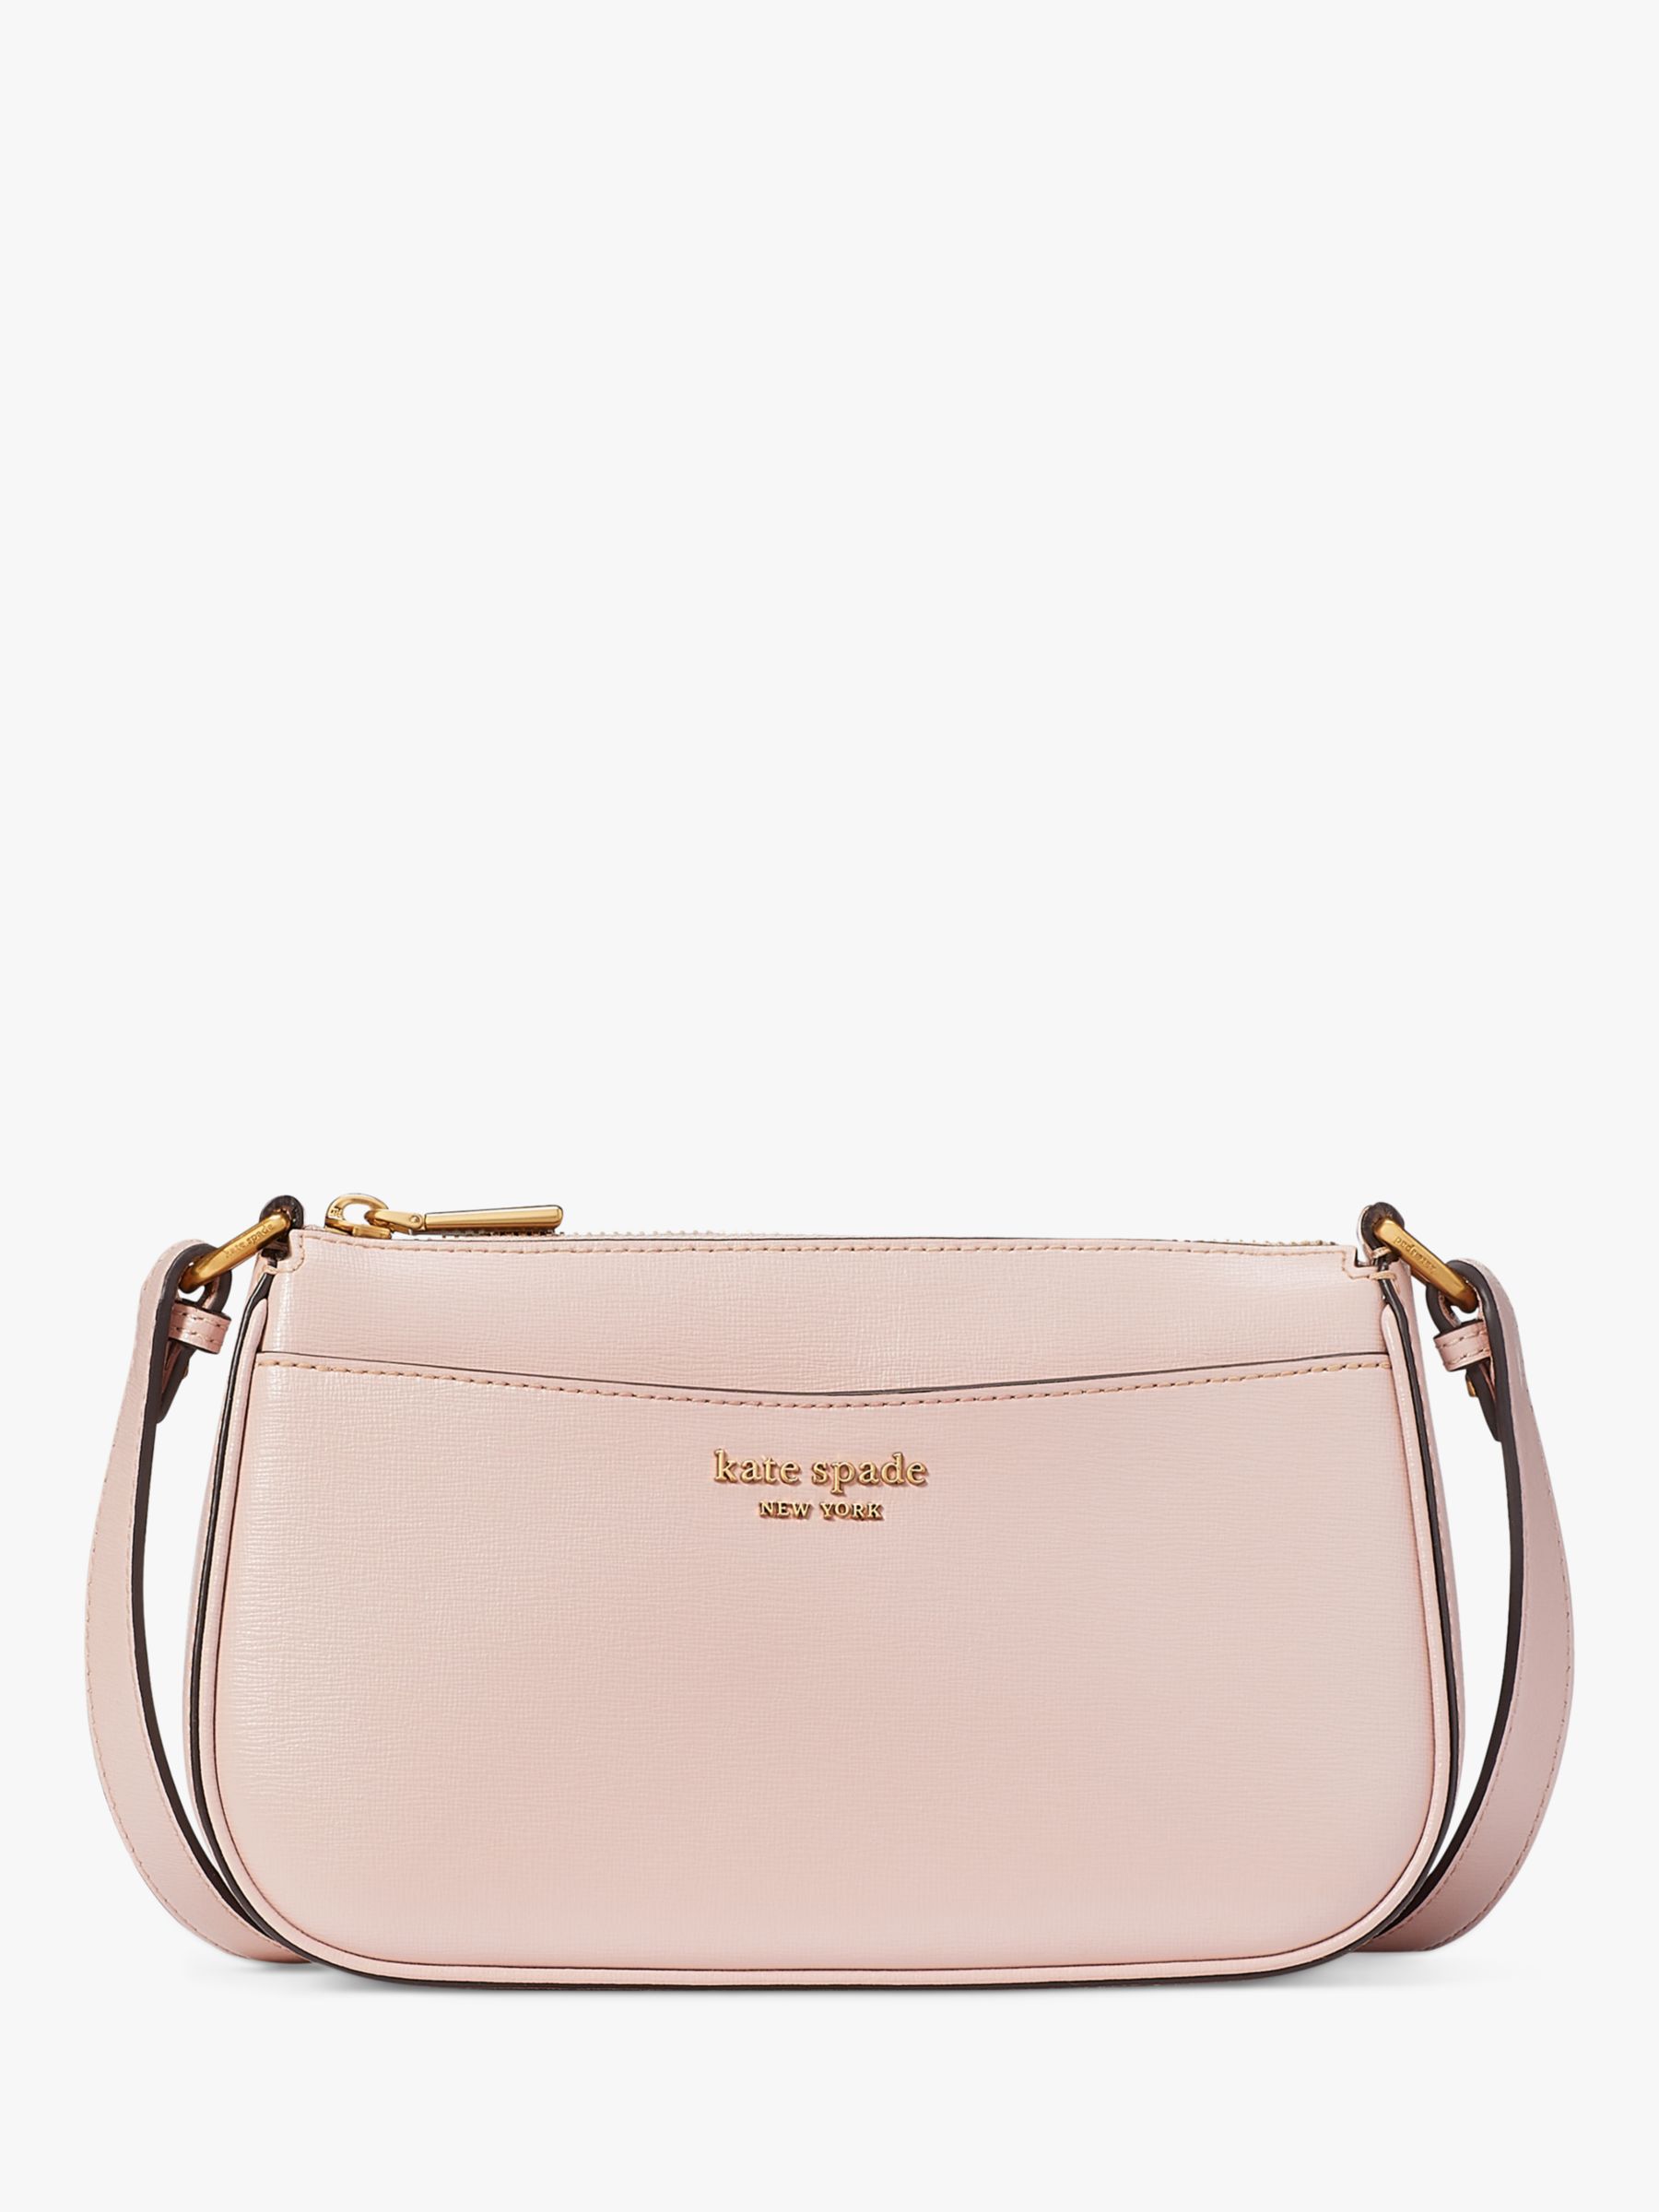 kate spade, Bags, Kate Spade Pink Purse And Wallet